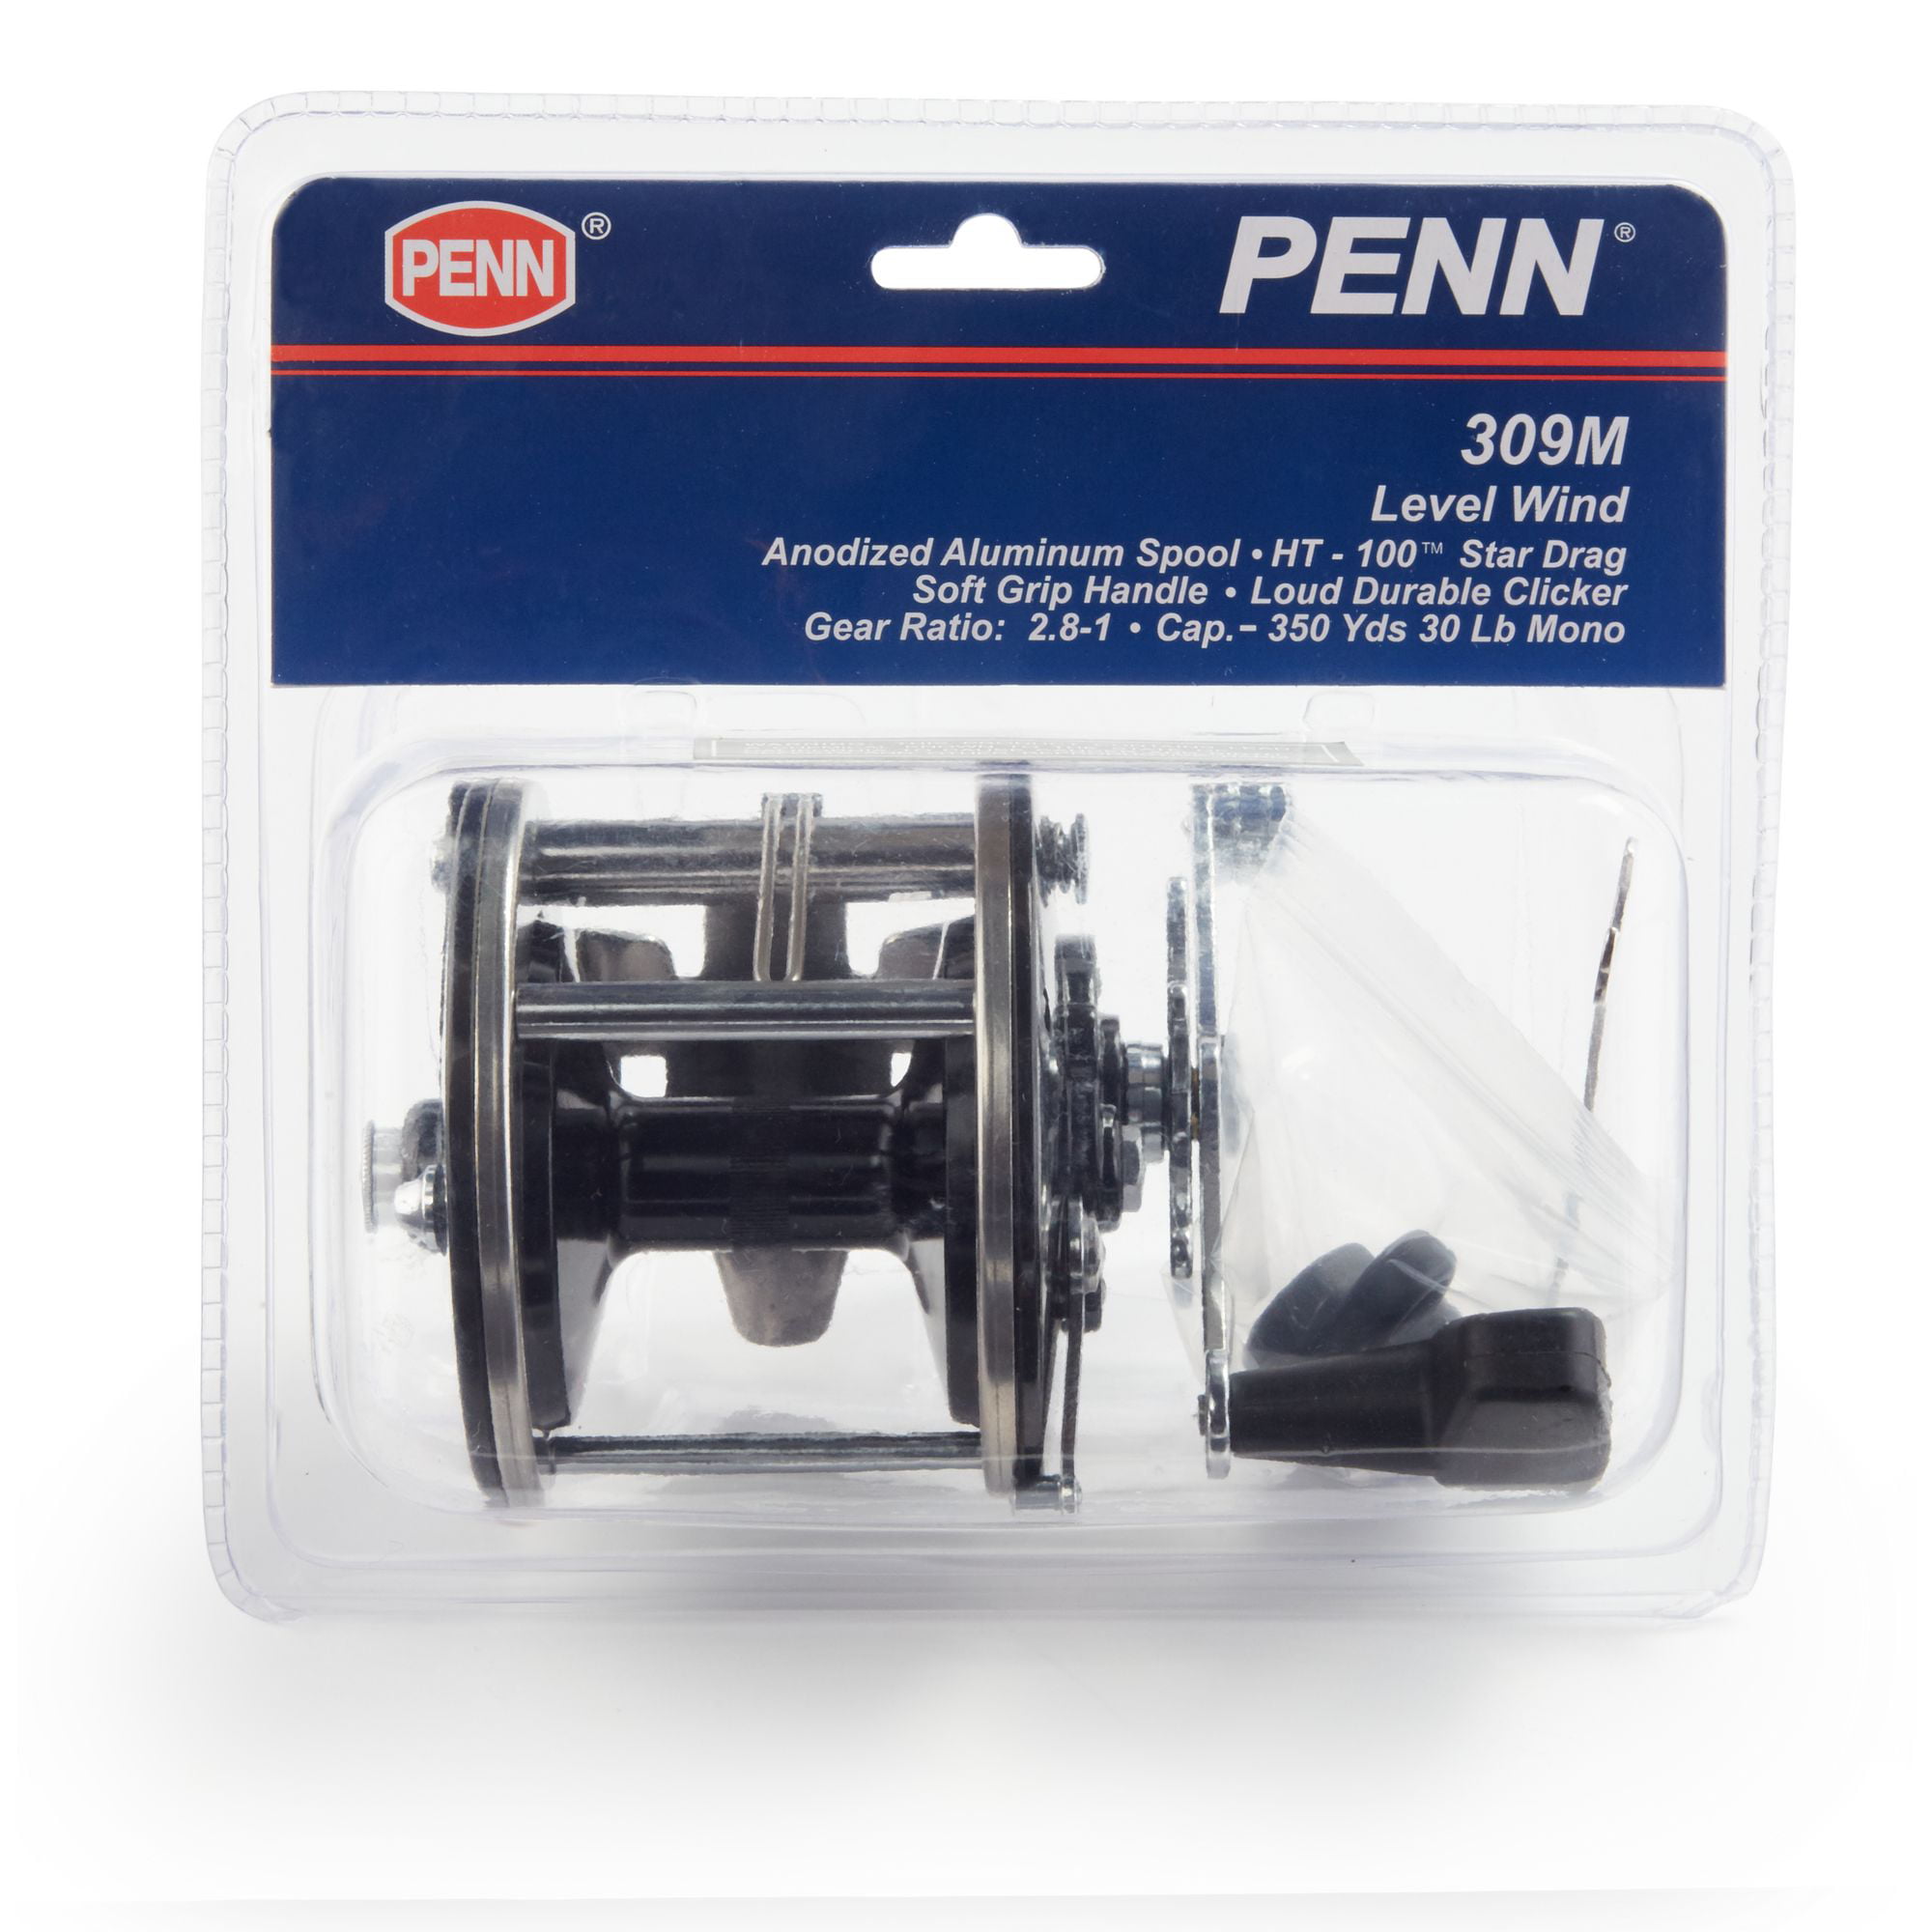 PENN General Purpose Level Wind Conventional Fishing Reel, Size 309 